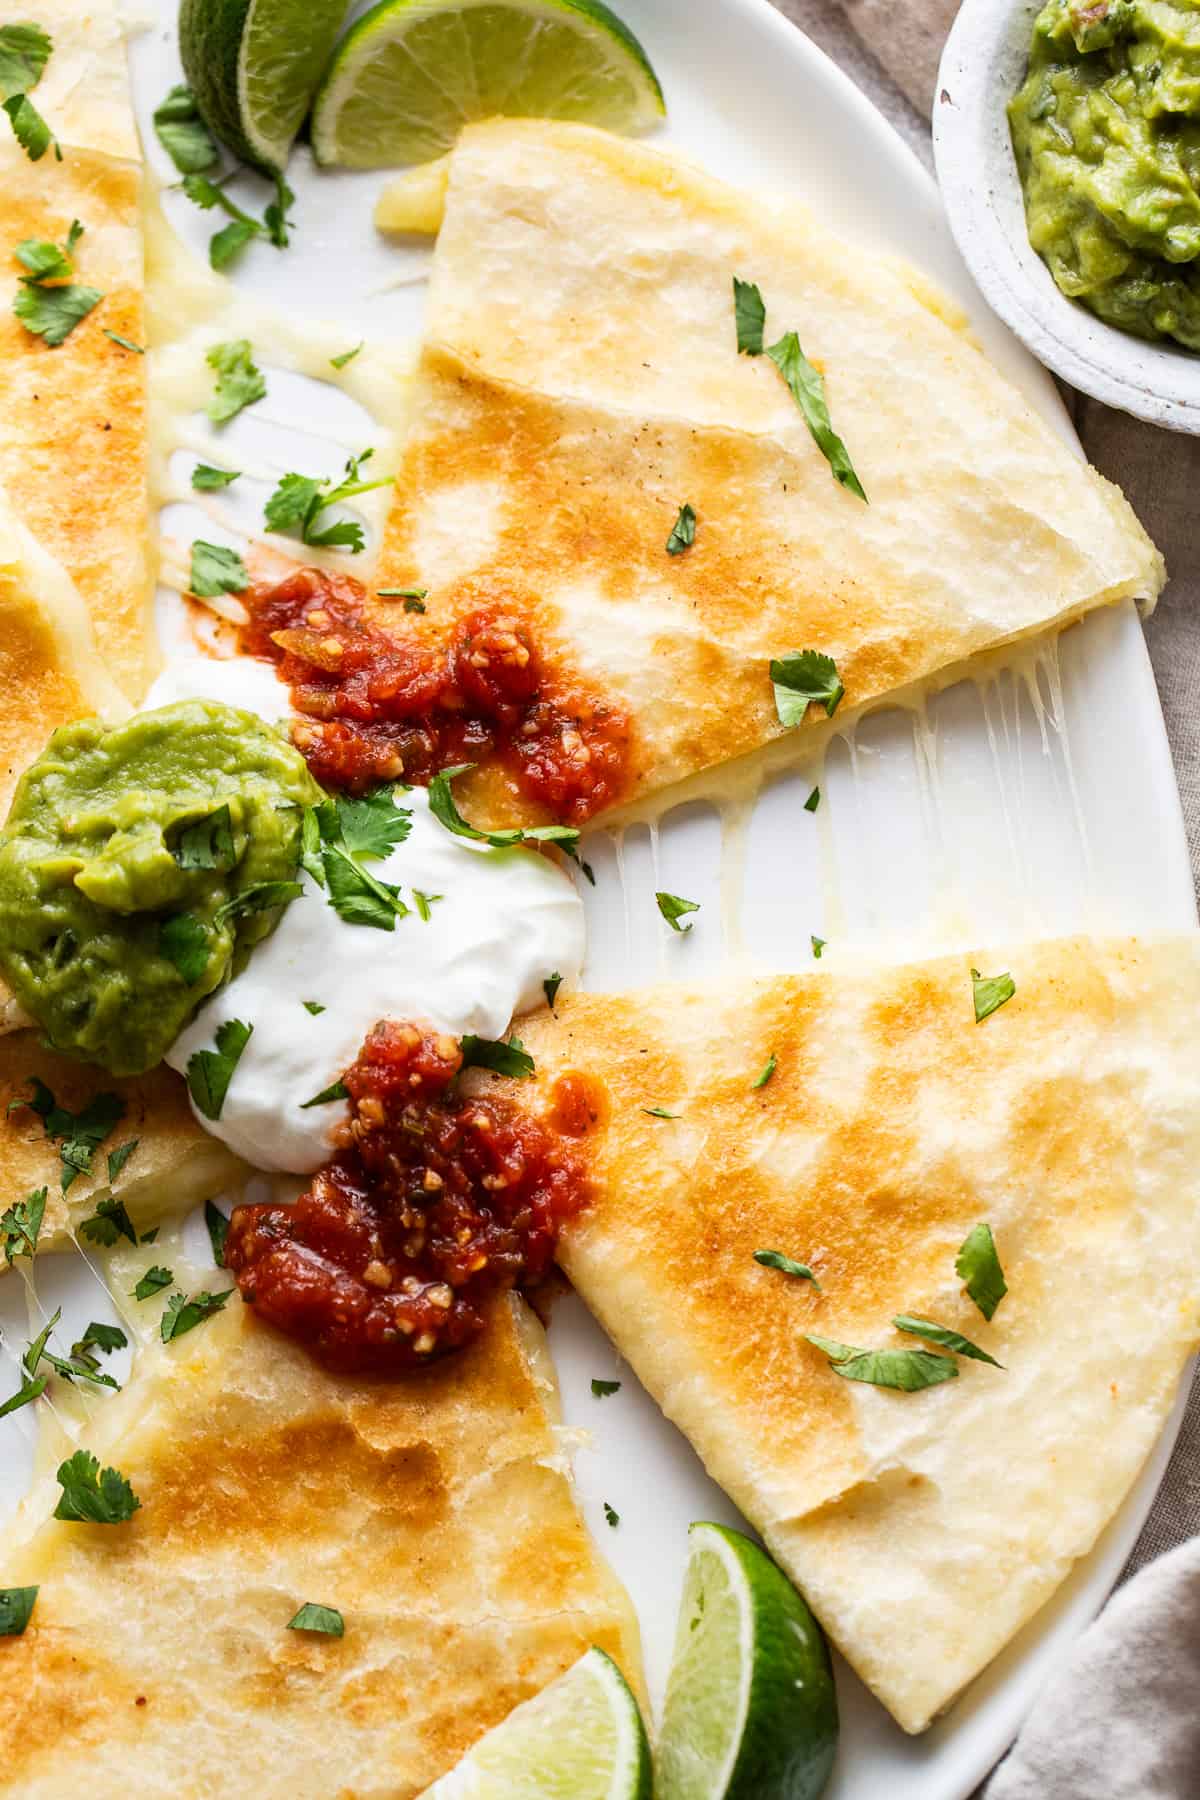 Cheese quesadillas on a plate served with salsa, sour cream, and guacamole.